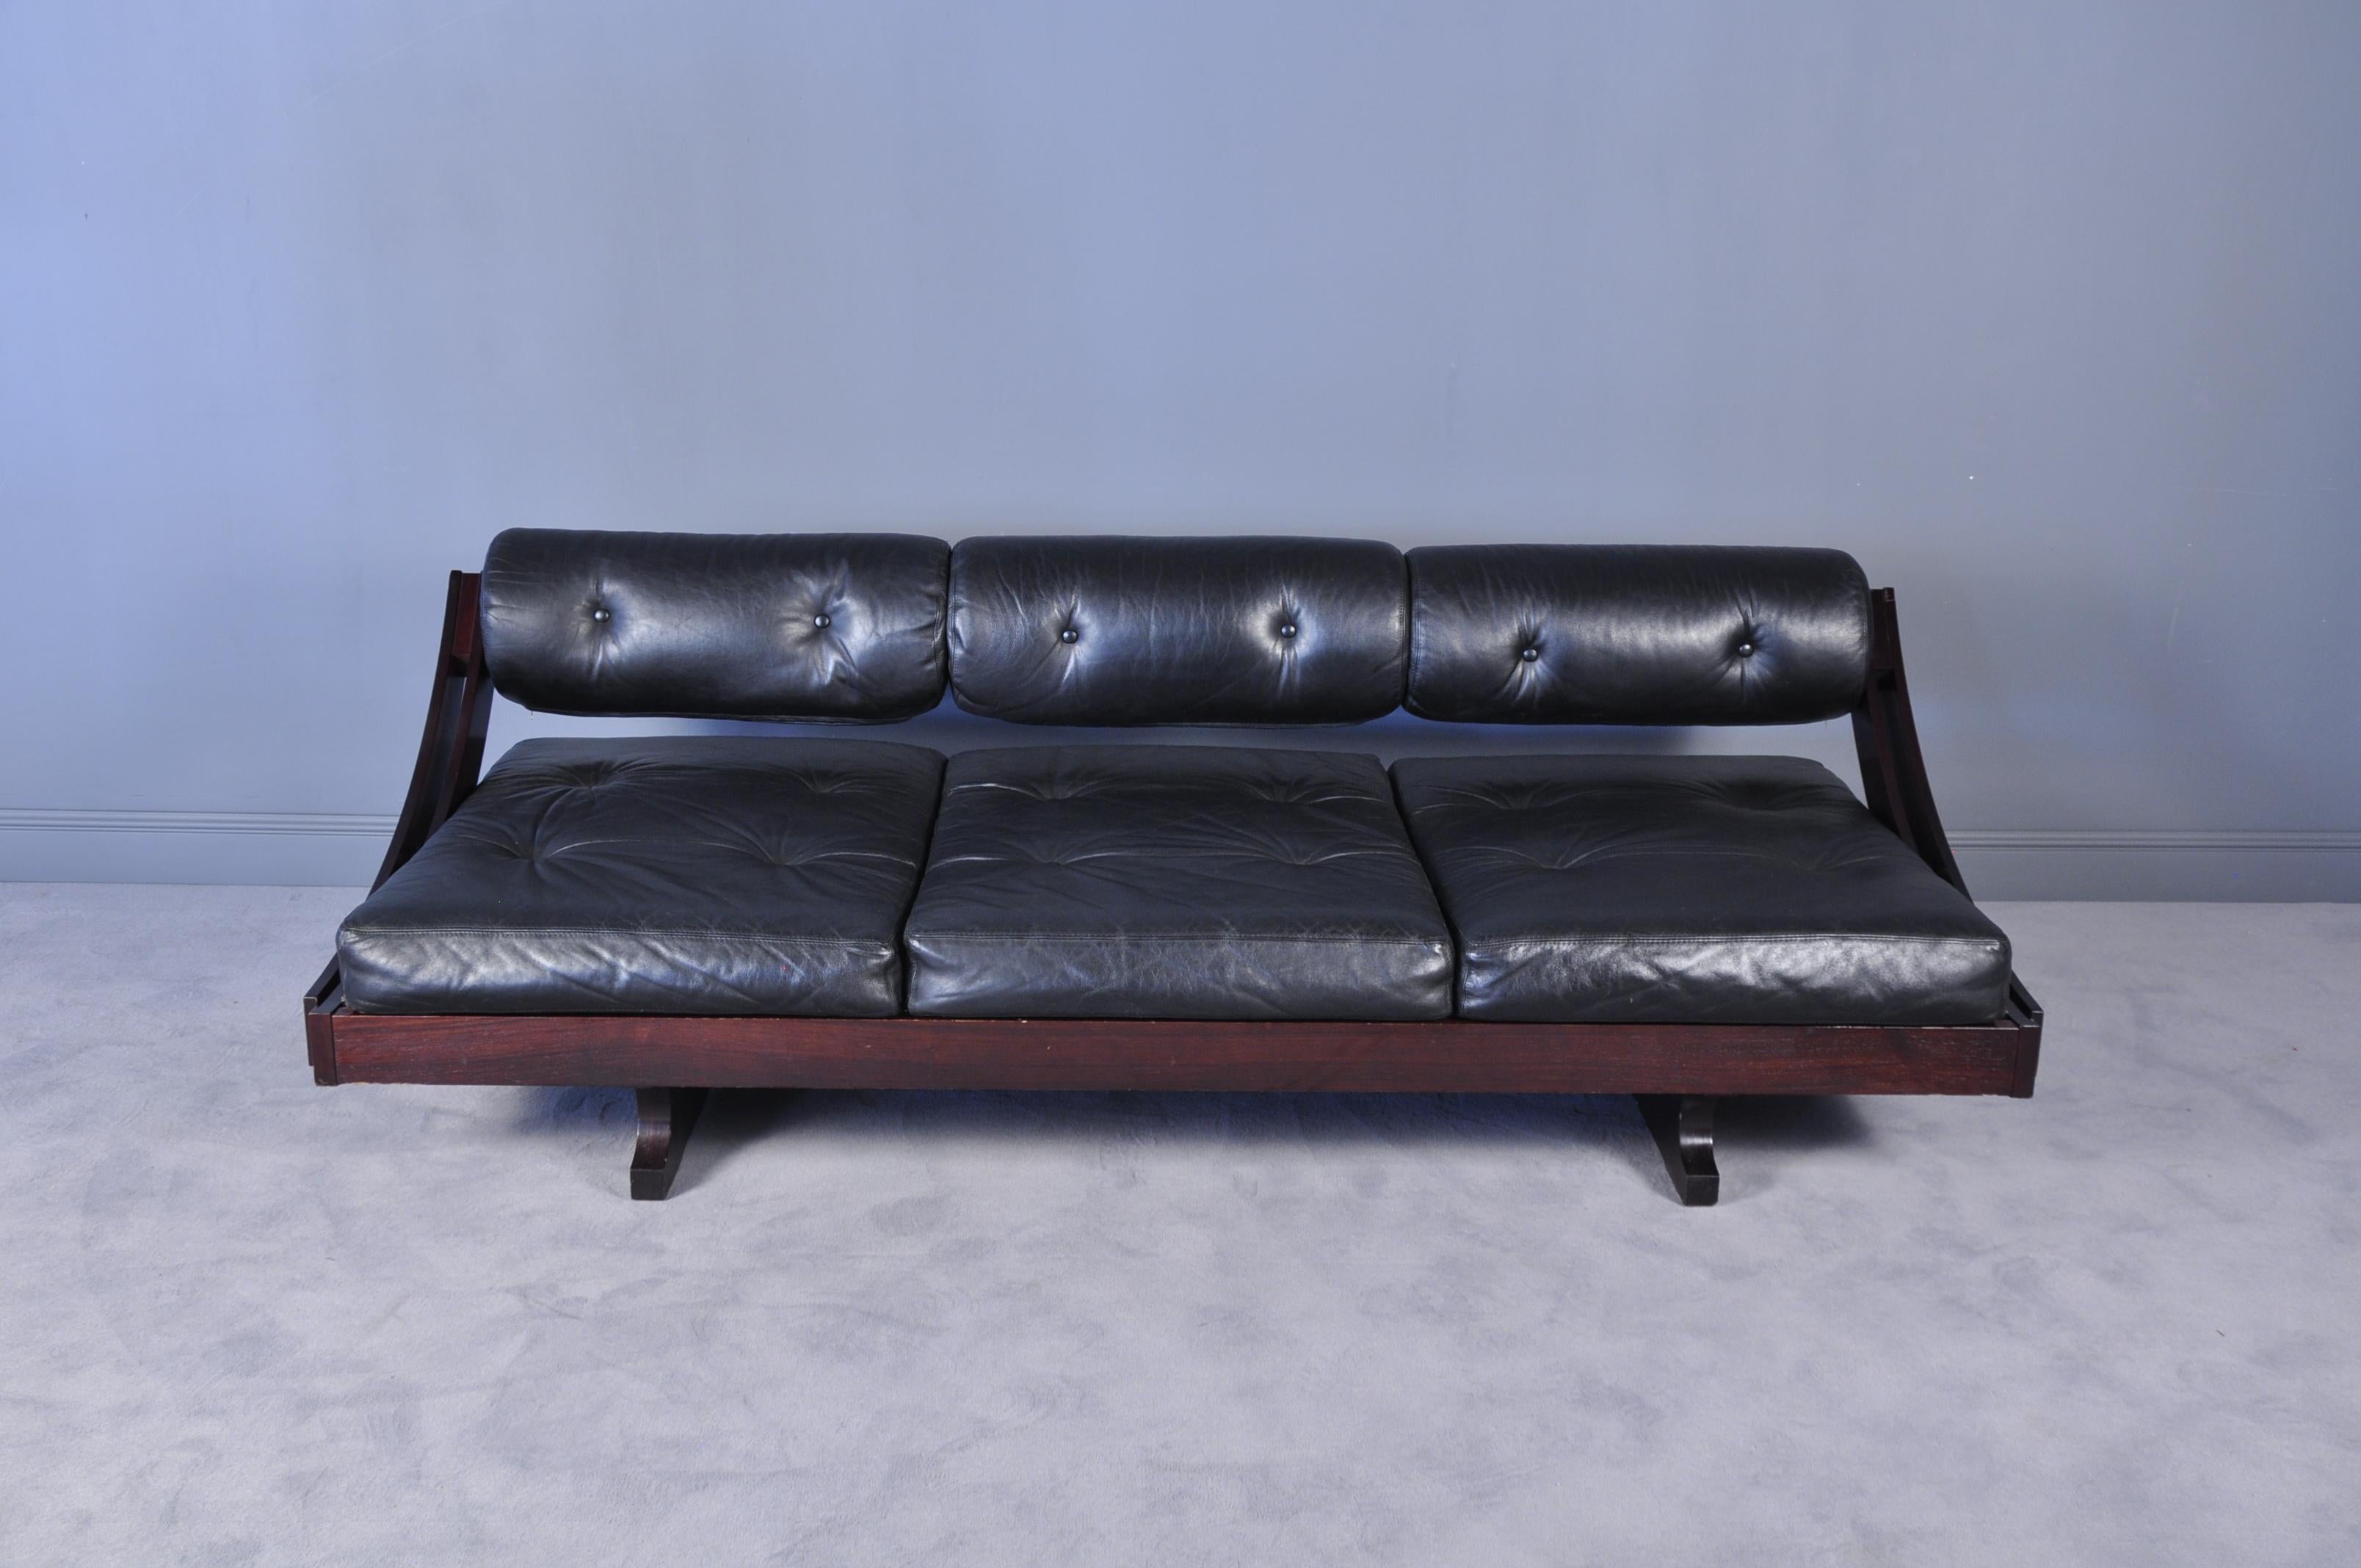 This GS-195 three-seat daybed sofa was designed by Gianni Songia for Sormani in Italy in 1963. It features soft and comfortable black leather upholstery. The backrest can be adjusted in two positions to use as a sofa or daybed and is working